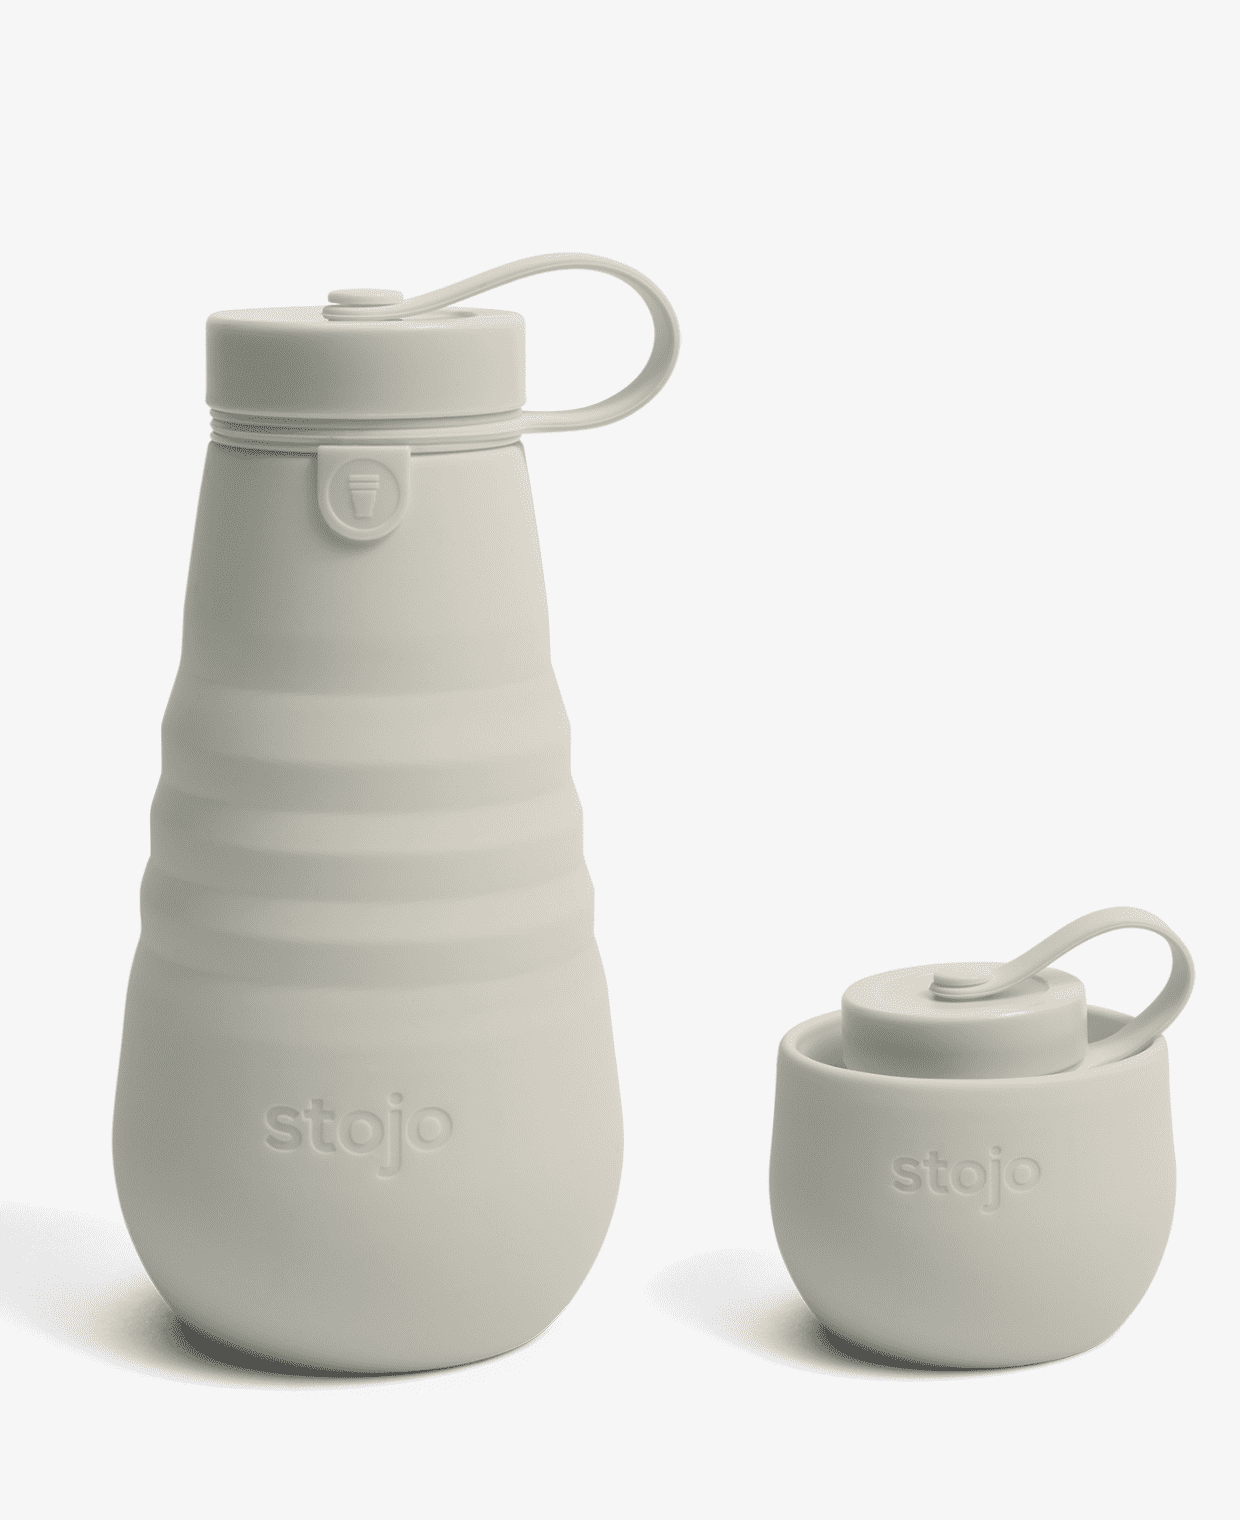 the-best-collapsible-bottle-stojo